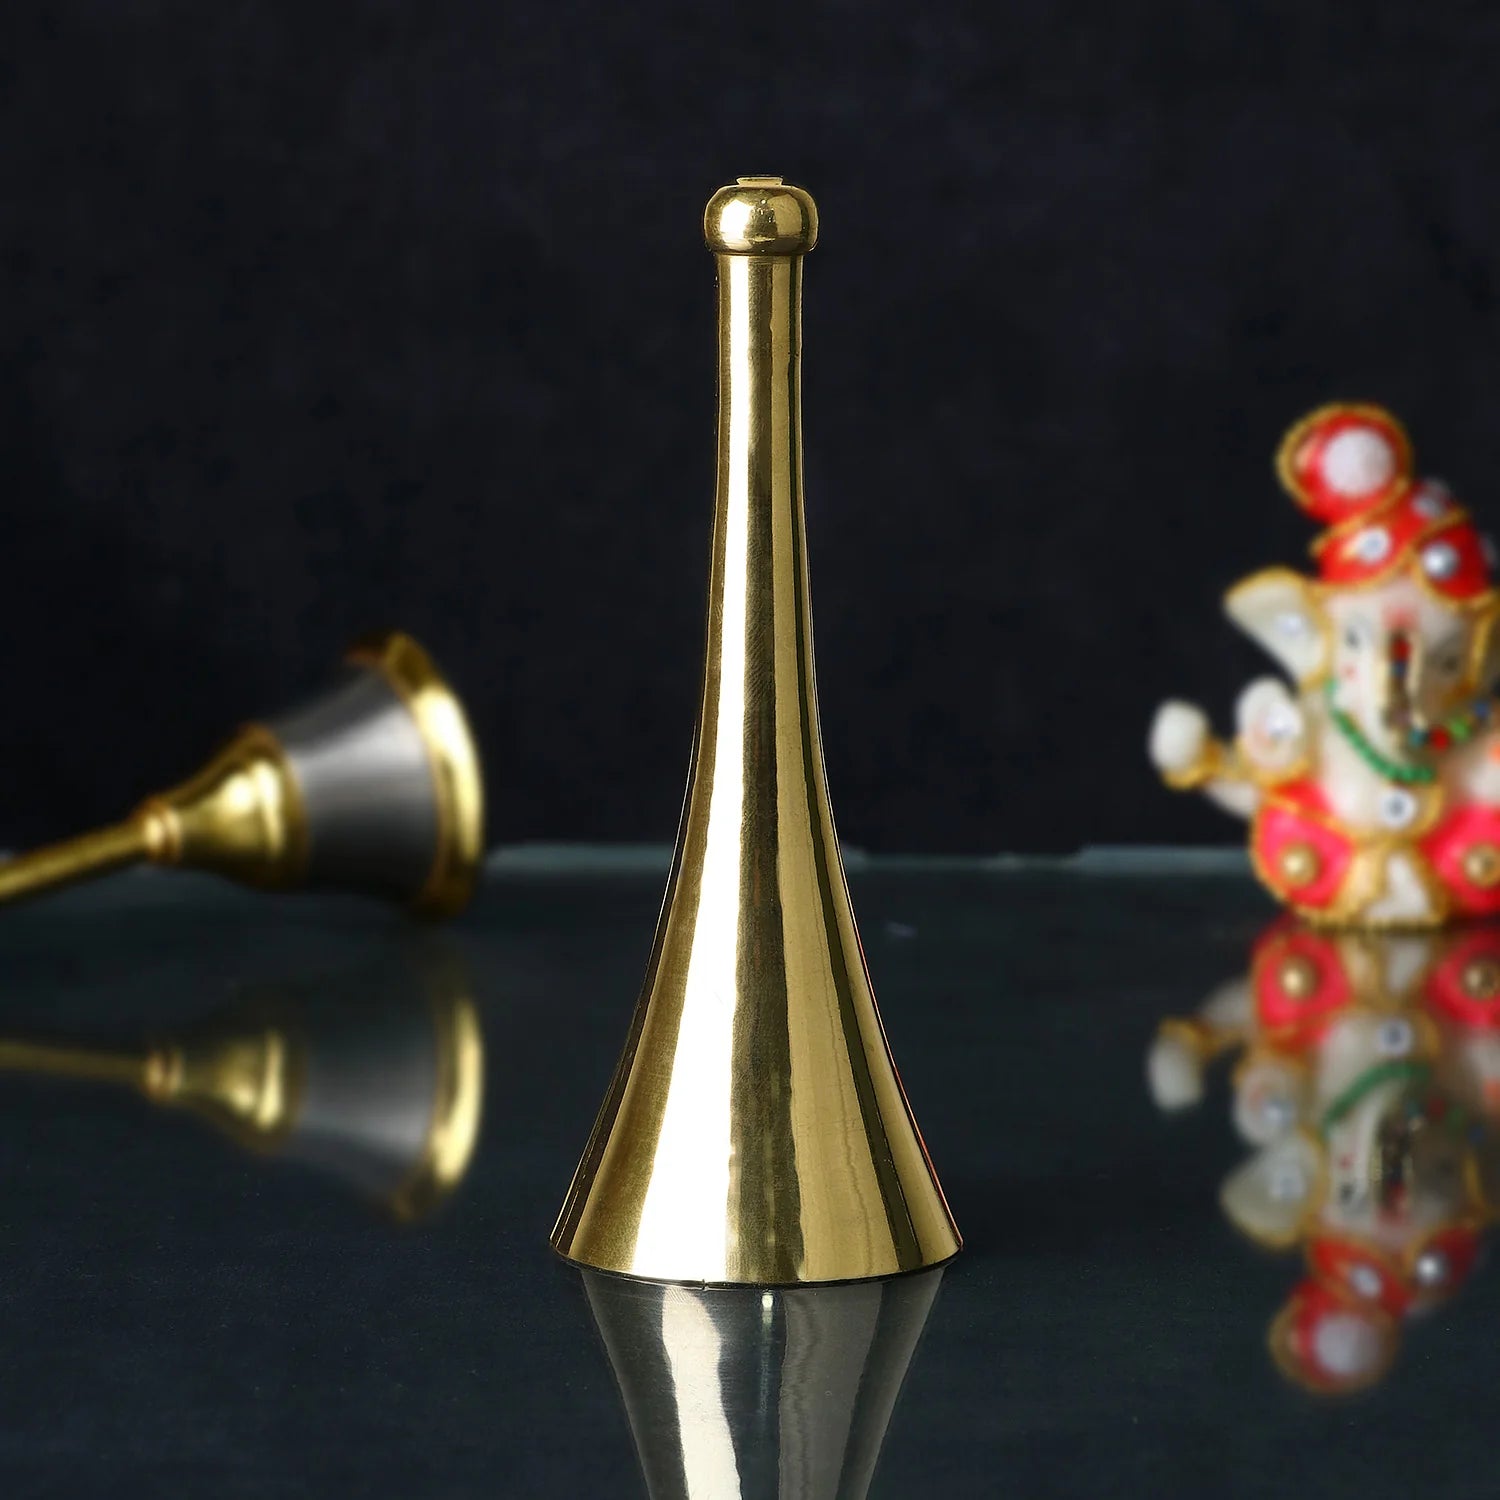 Exquisite Brass Cone Shape Pooja Bell – AAHUTII